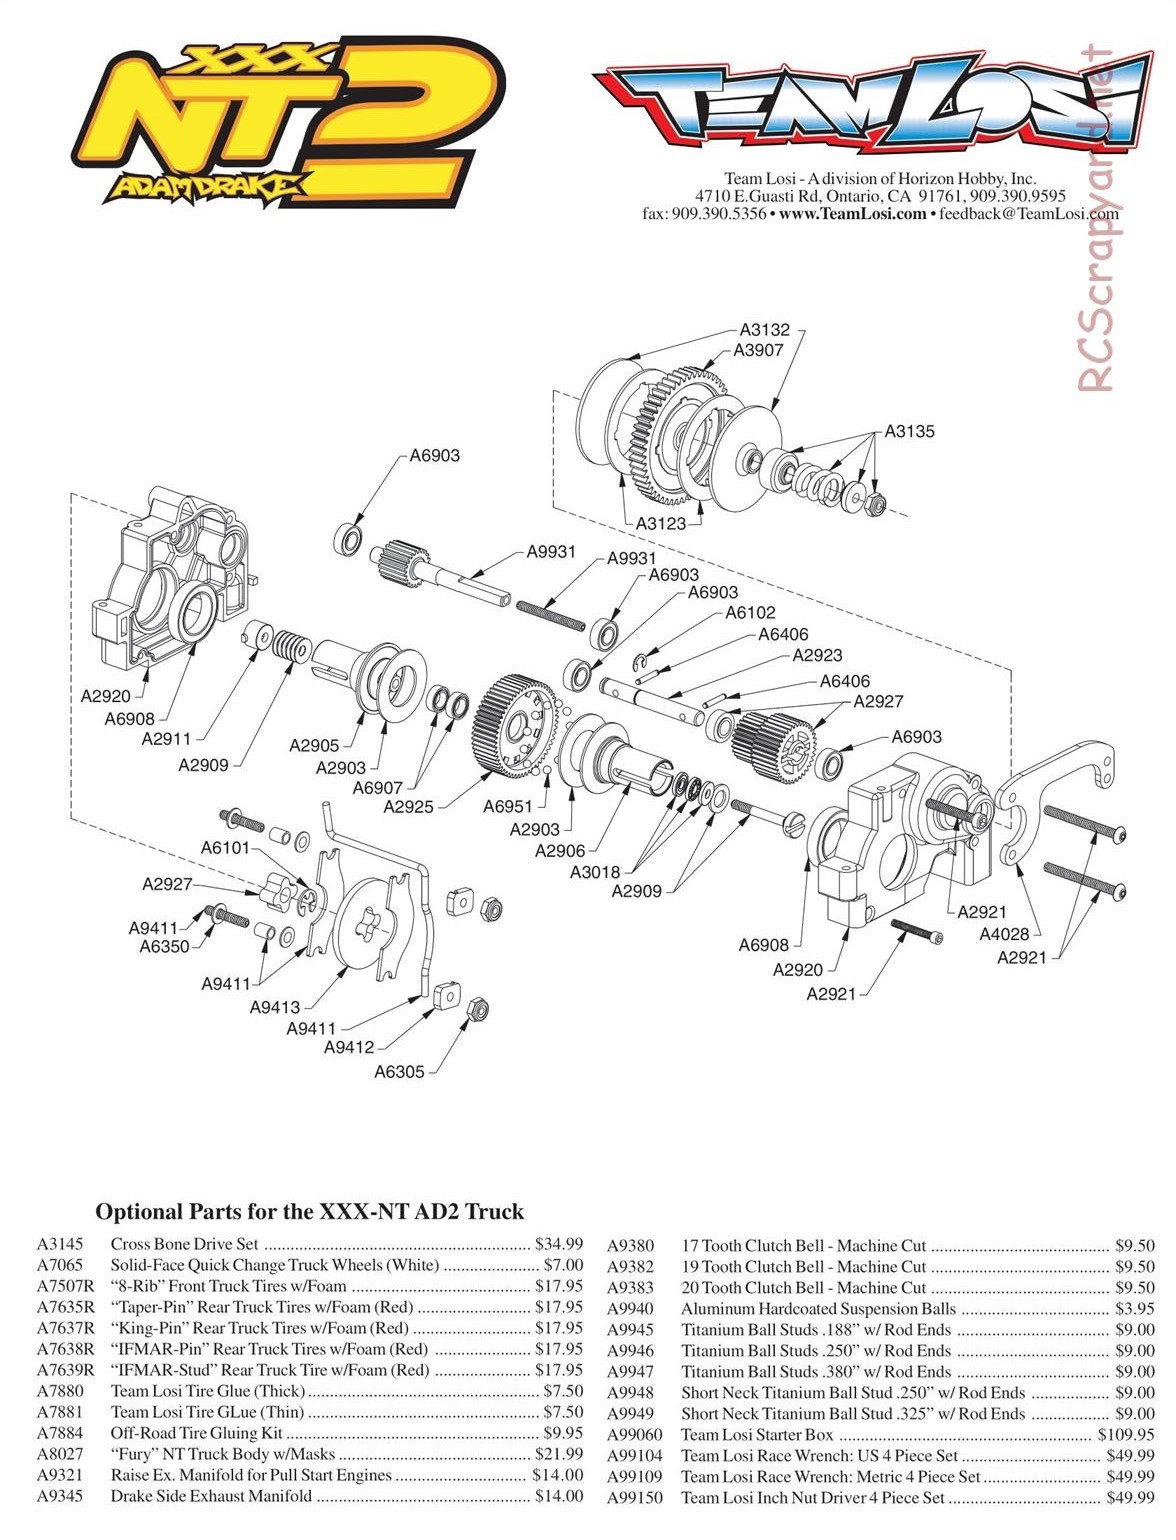 Team Losi - XXX NT AD2 - Manual - Page 4